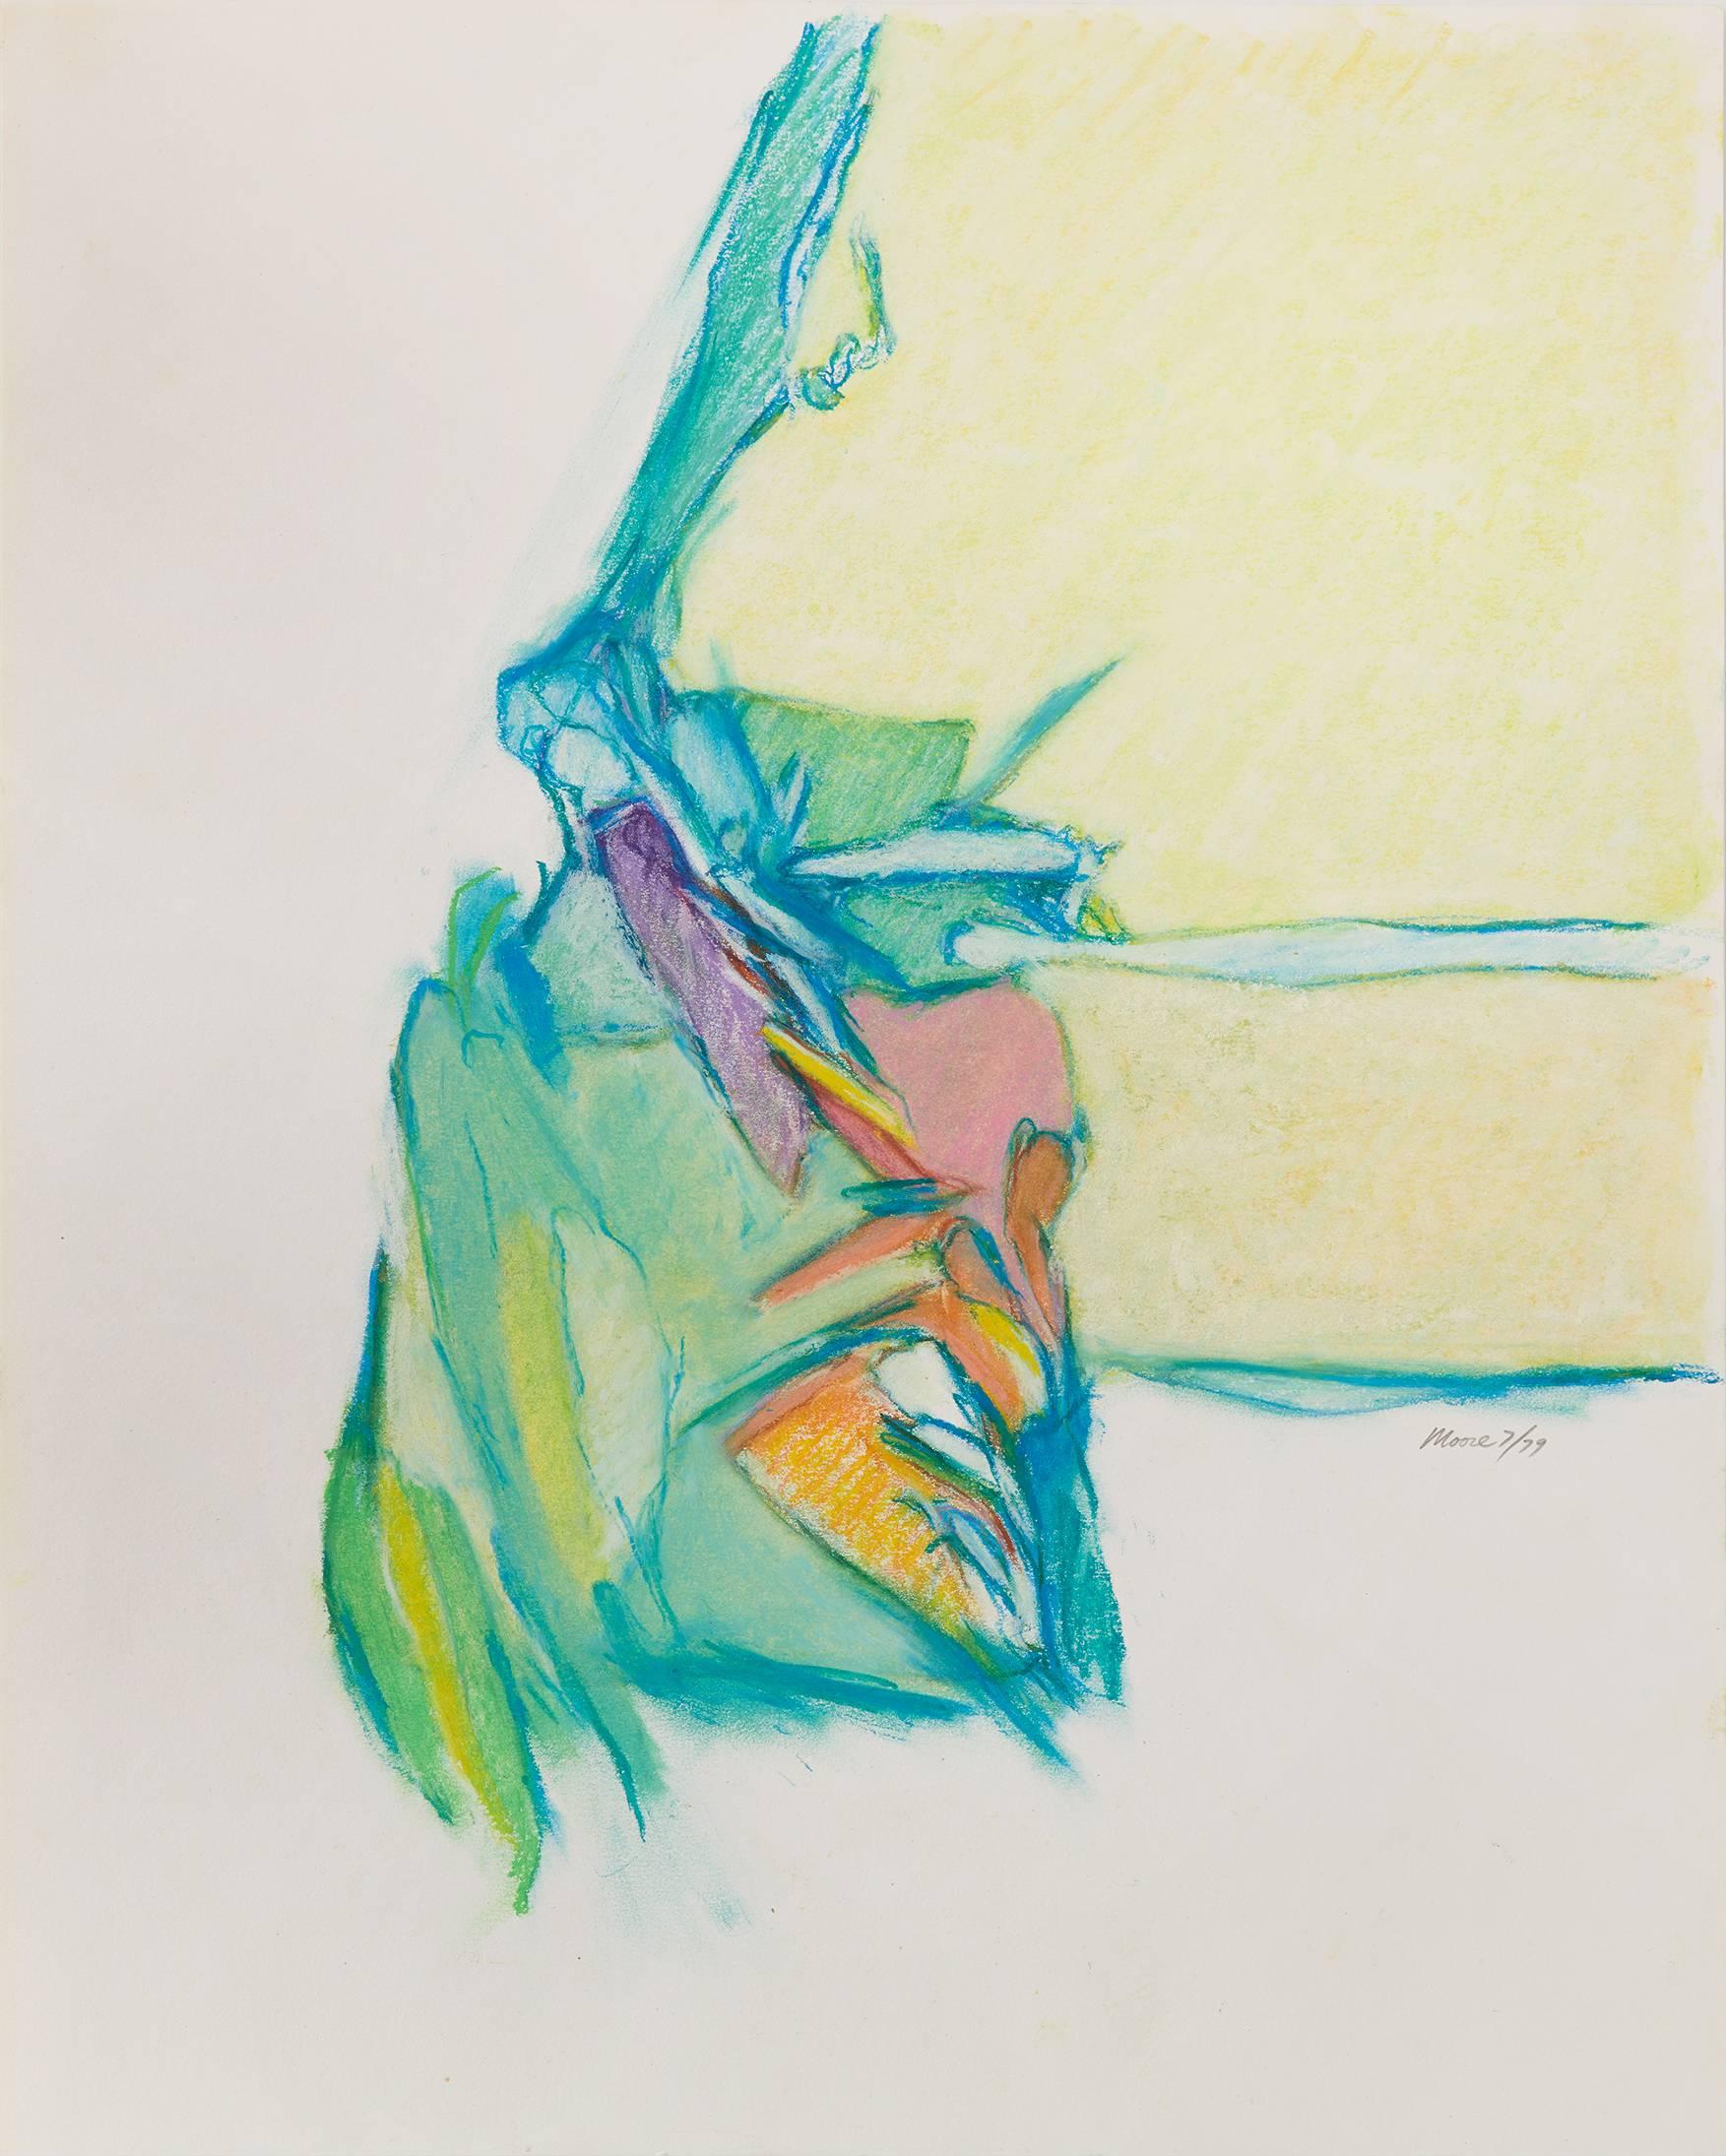 James Moore Abstract Drawing - Untitled II (multi), 1979, pastel on paper, 20 x 16 inches. Soft abstraction